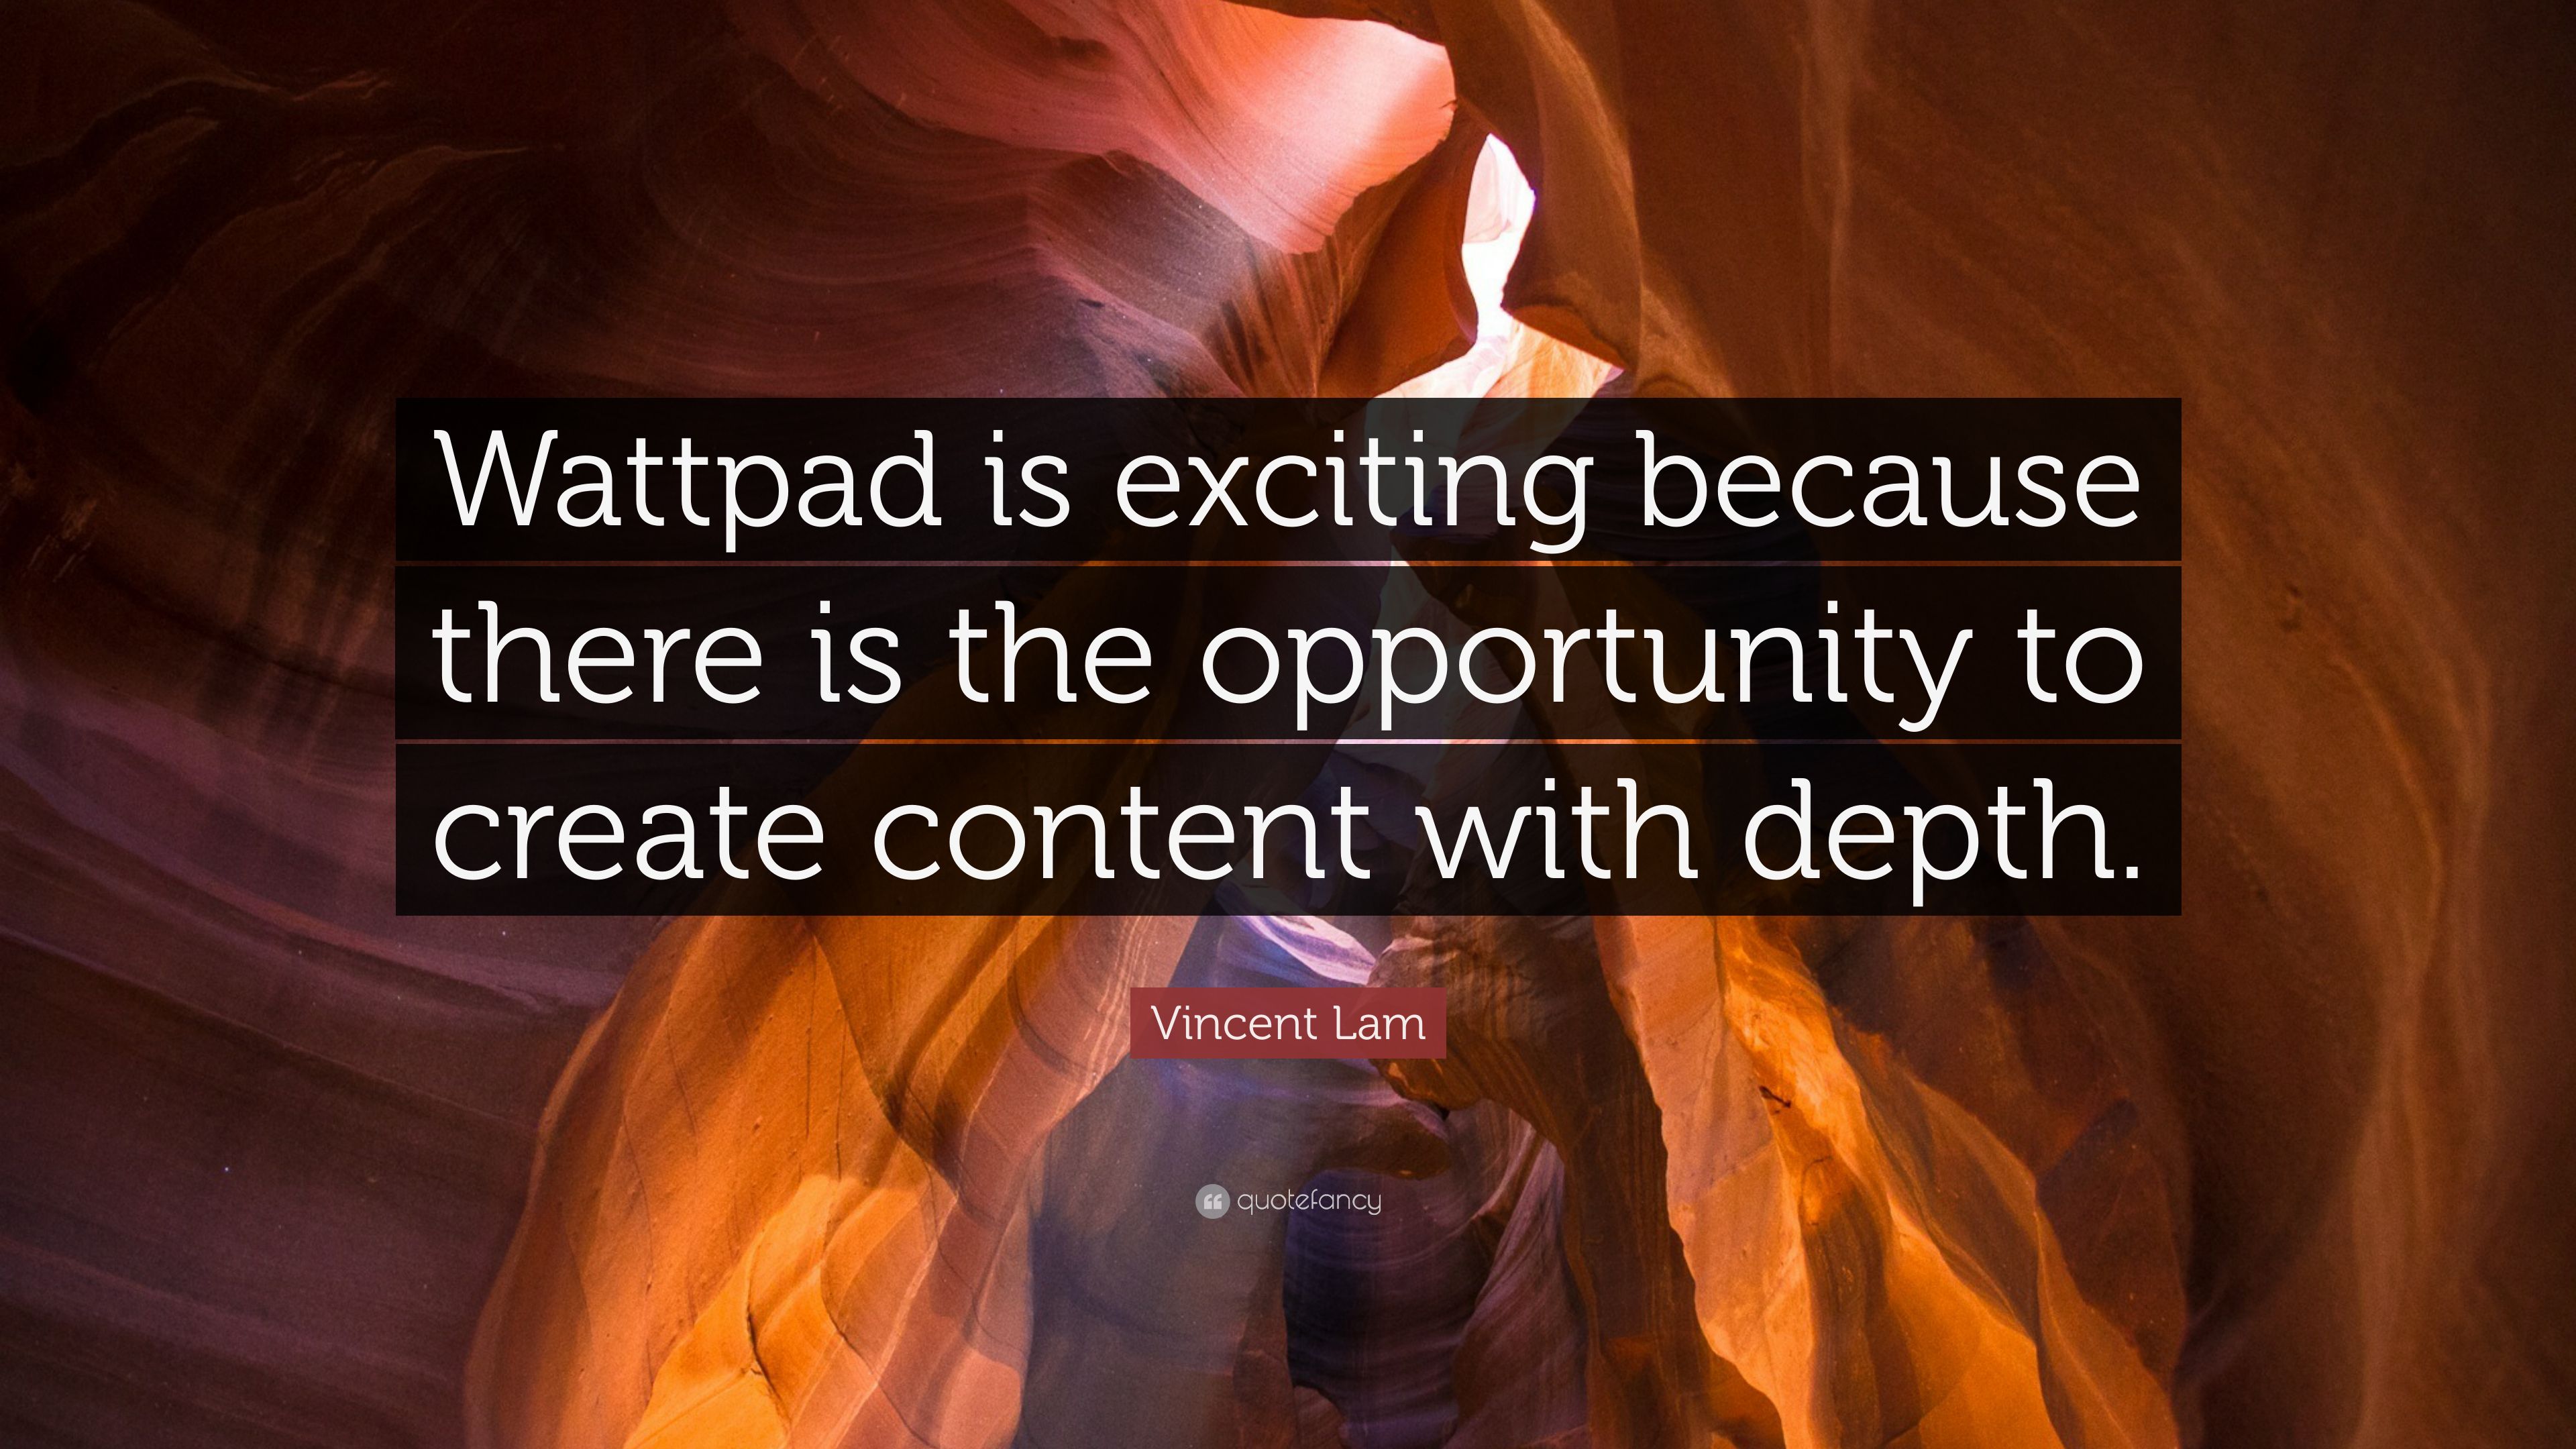 Vincent Lam Quote: “Wattpad is exciting because there is